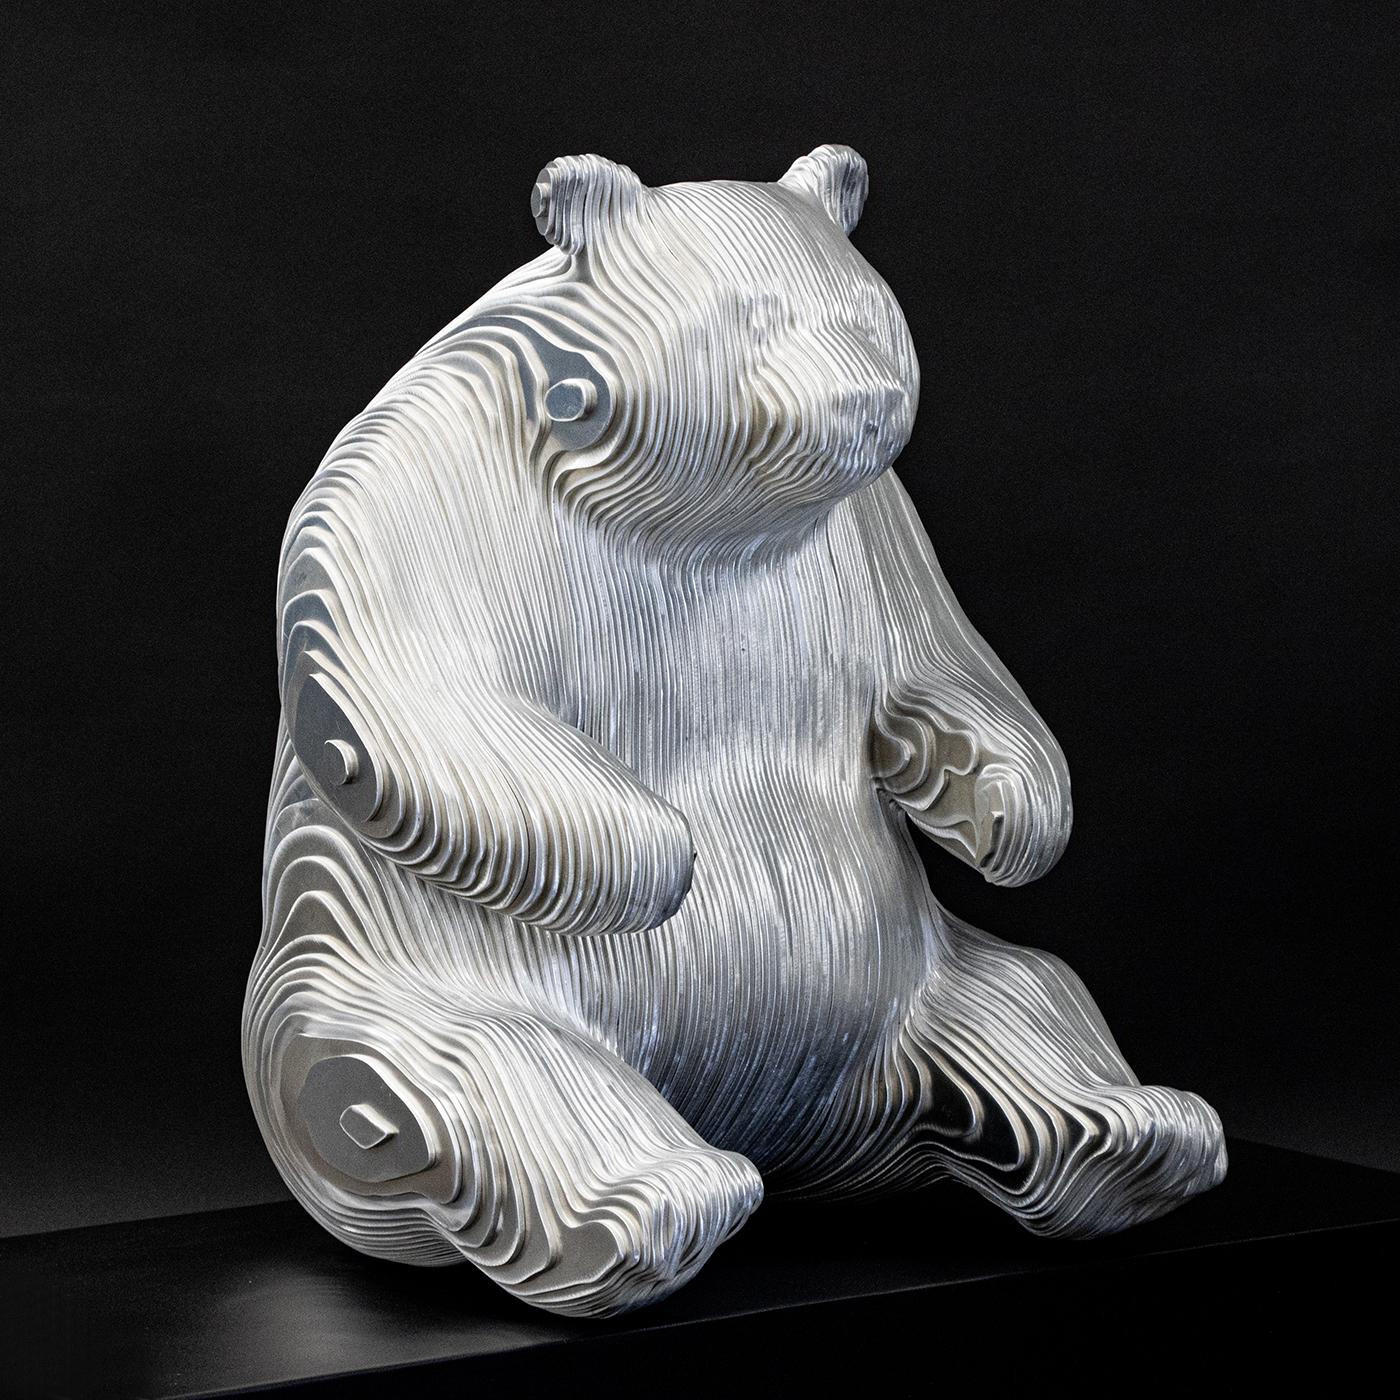 Sculpture Panda Polished made with aluminium 
hand-crafted plates. Limited Edition of 8 pieces 
made in welded and shaped aluminium into masterful 
works of contemporary art.